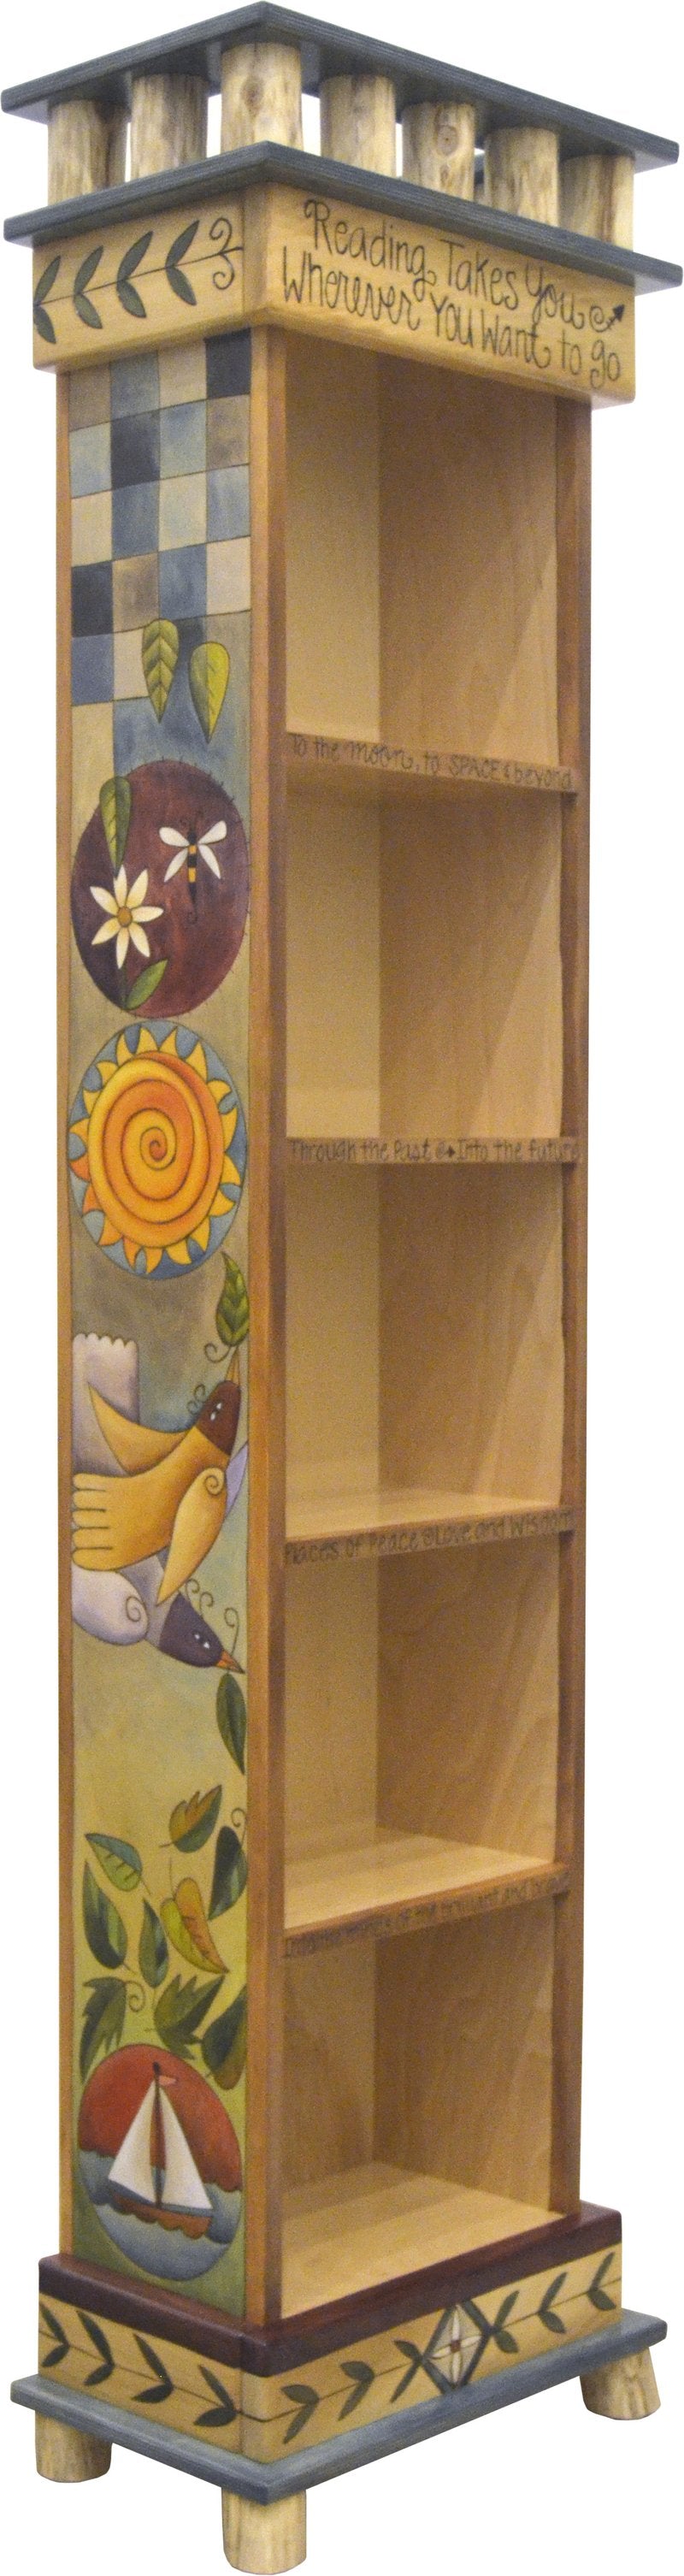 Tall Bookcase-Reading Takes You